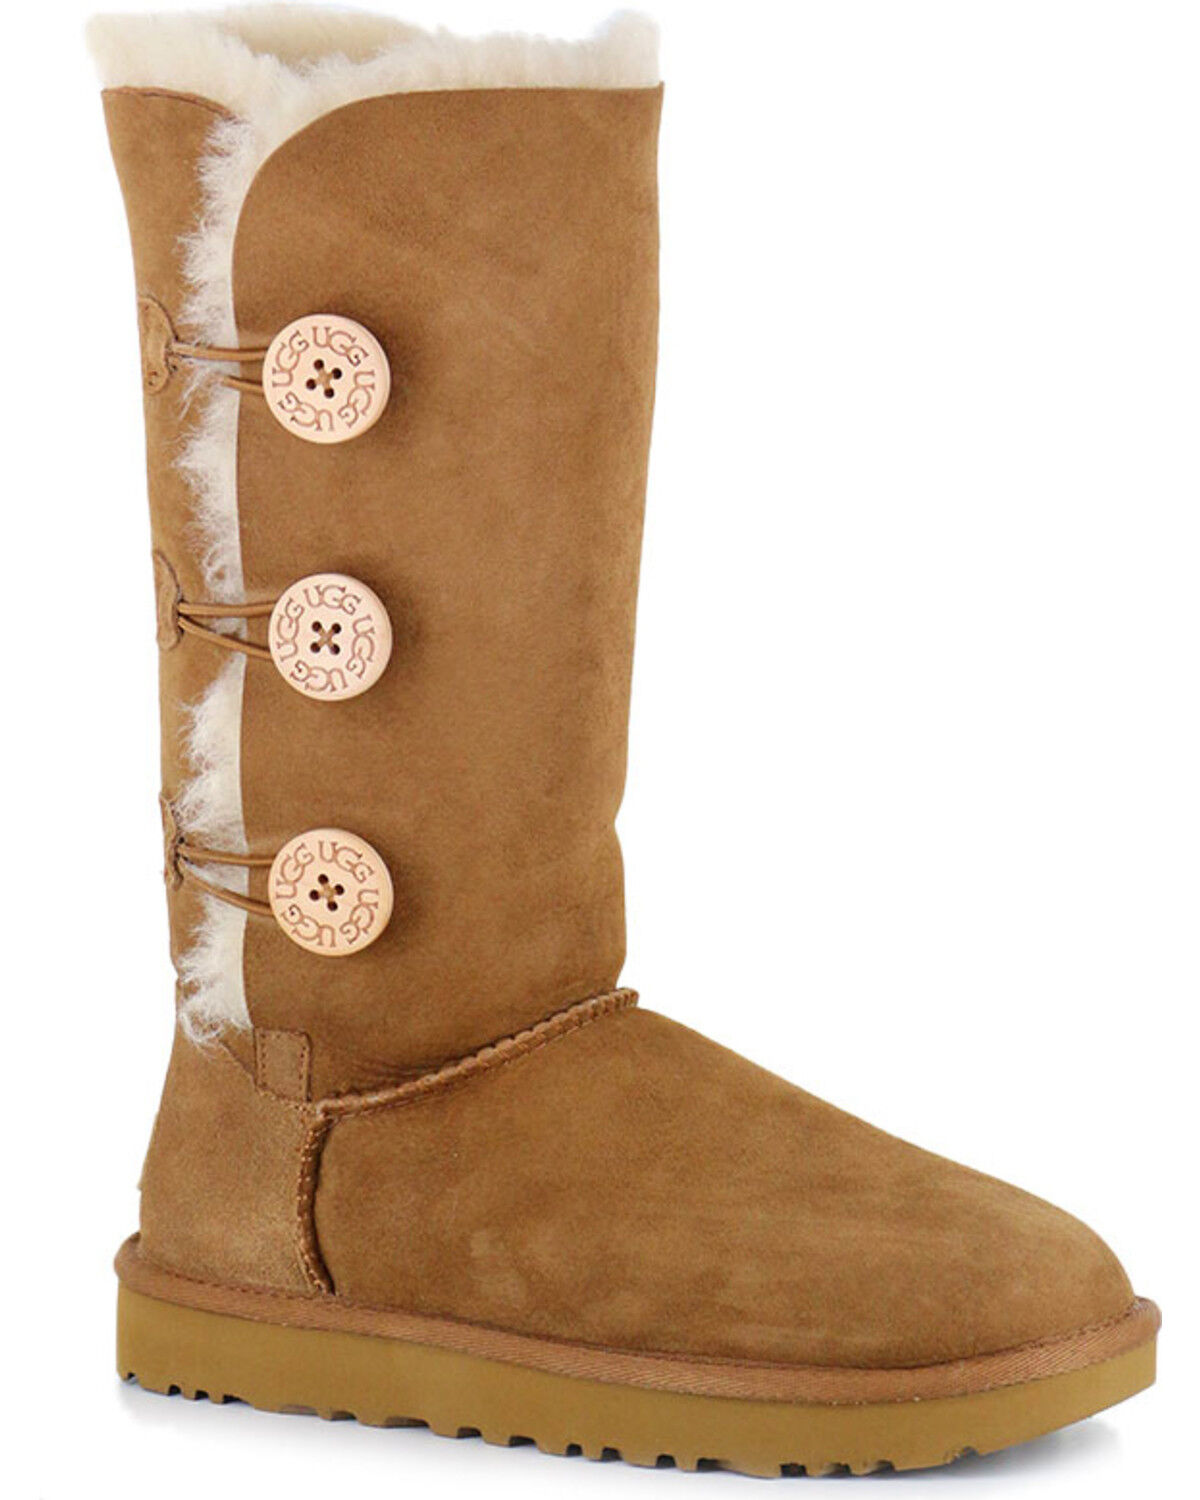 tan ugg boots with buttons 